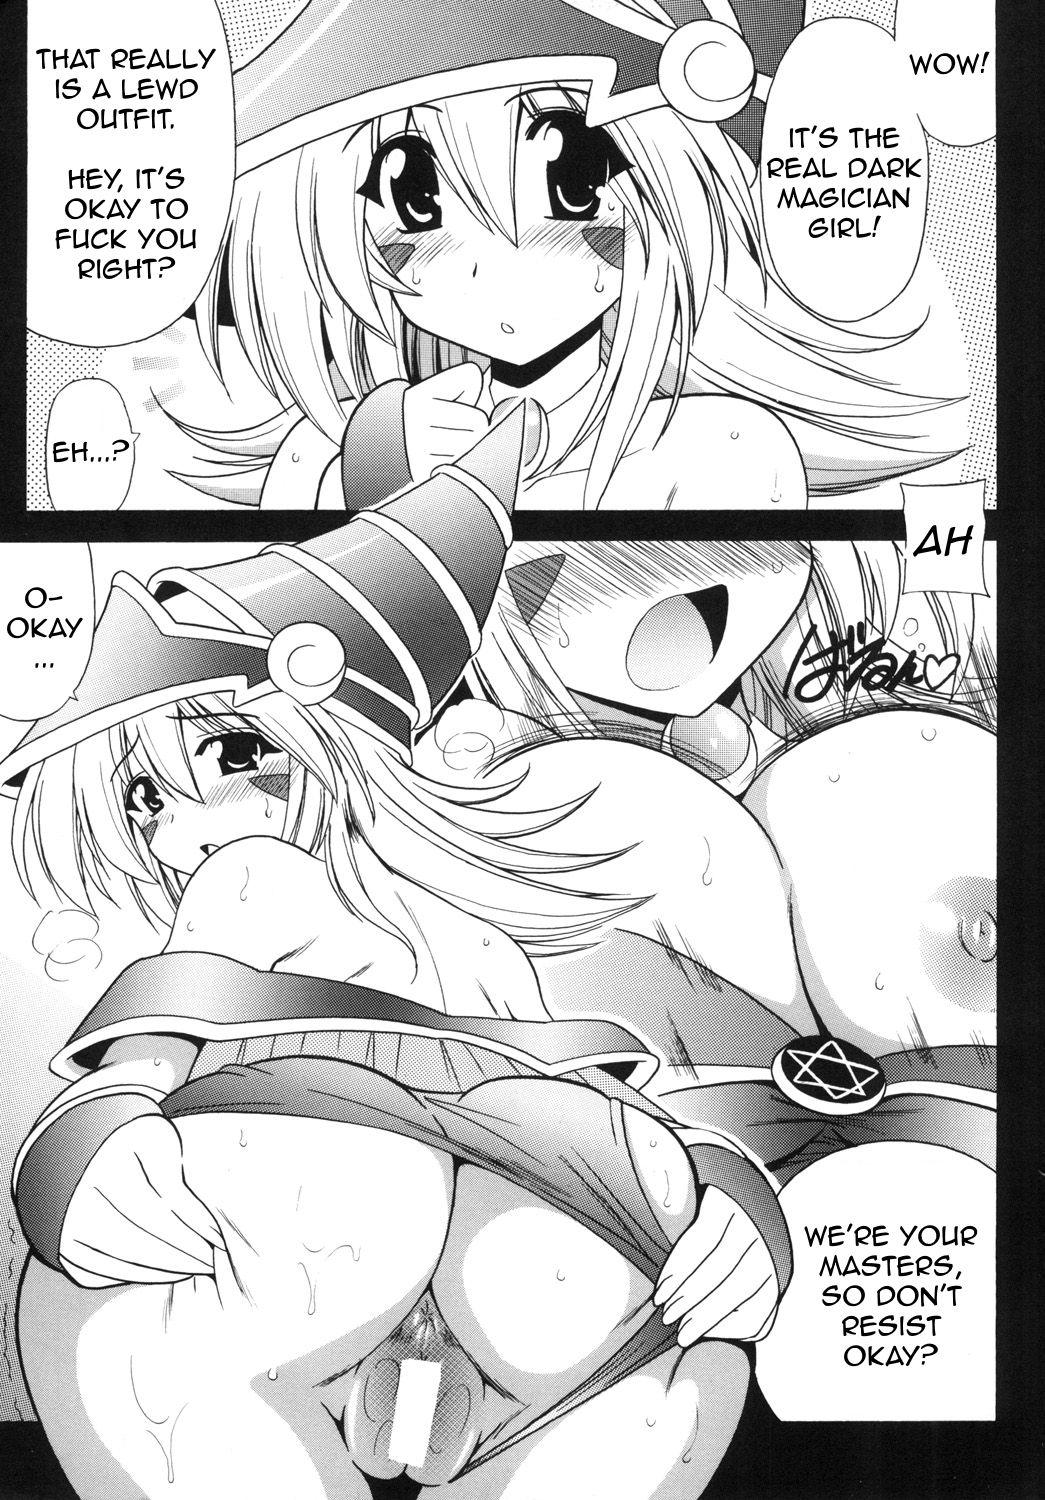 Porno BMG to Ecchi Shiyou ♡ | Let's Have Sex with Dark Magician Girl ♡ - Yu gi oh Friend - Page 3